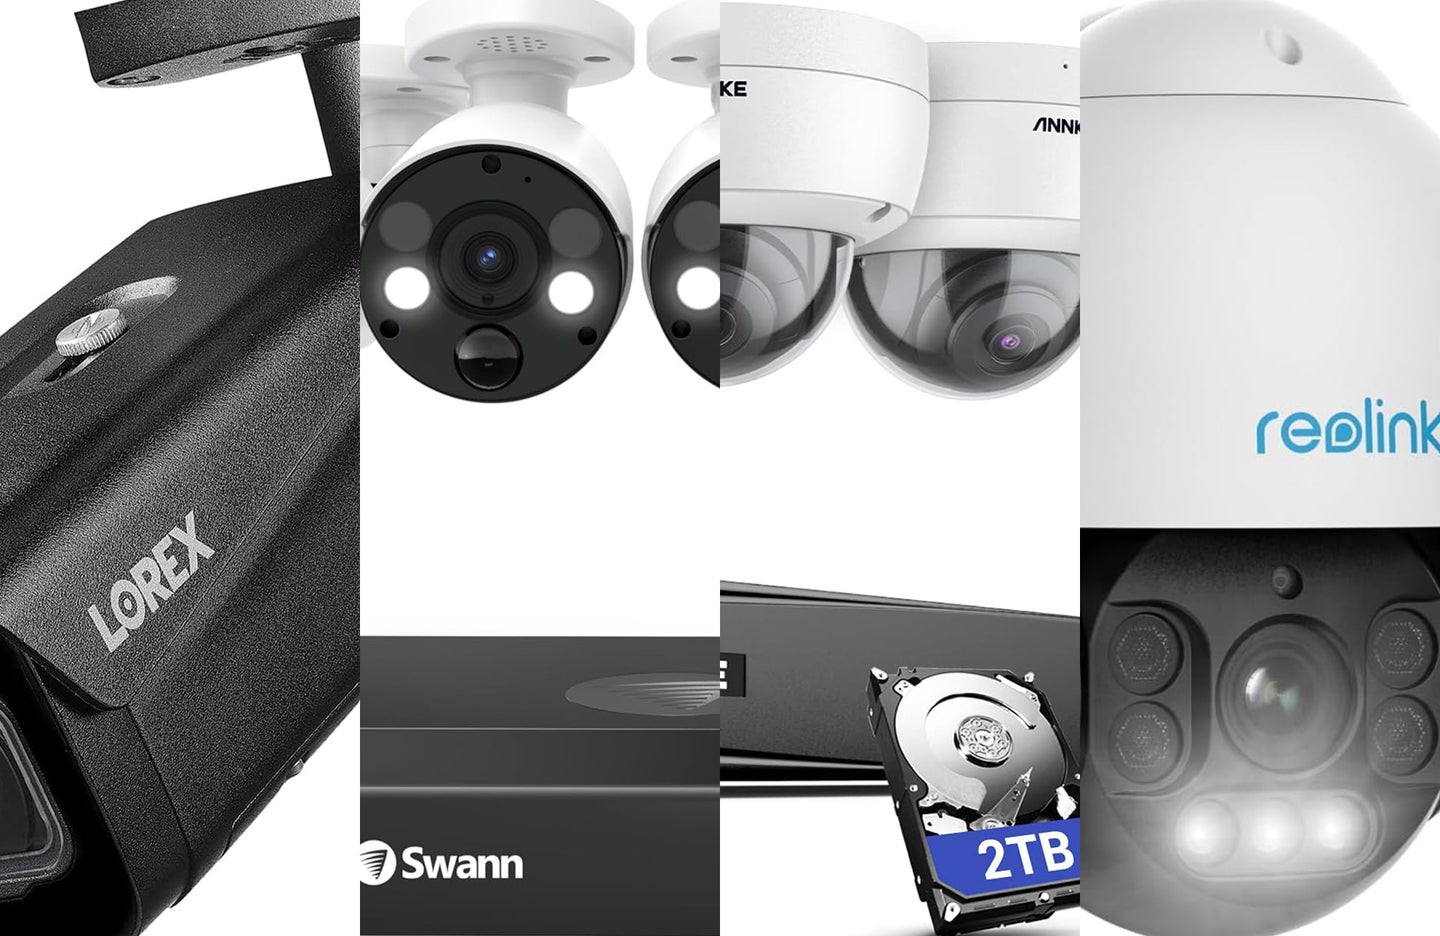 Four of the best wired security systems are sliced together against a white background.